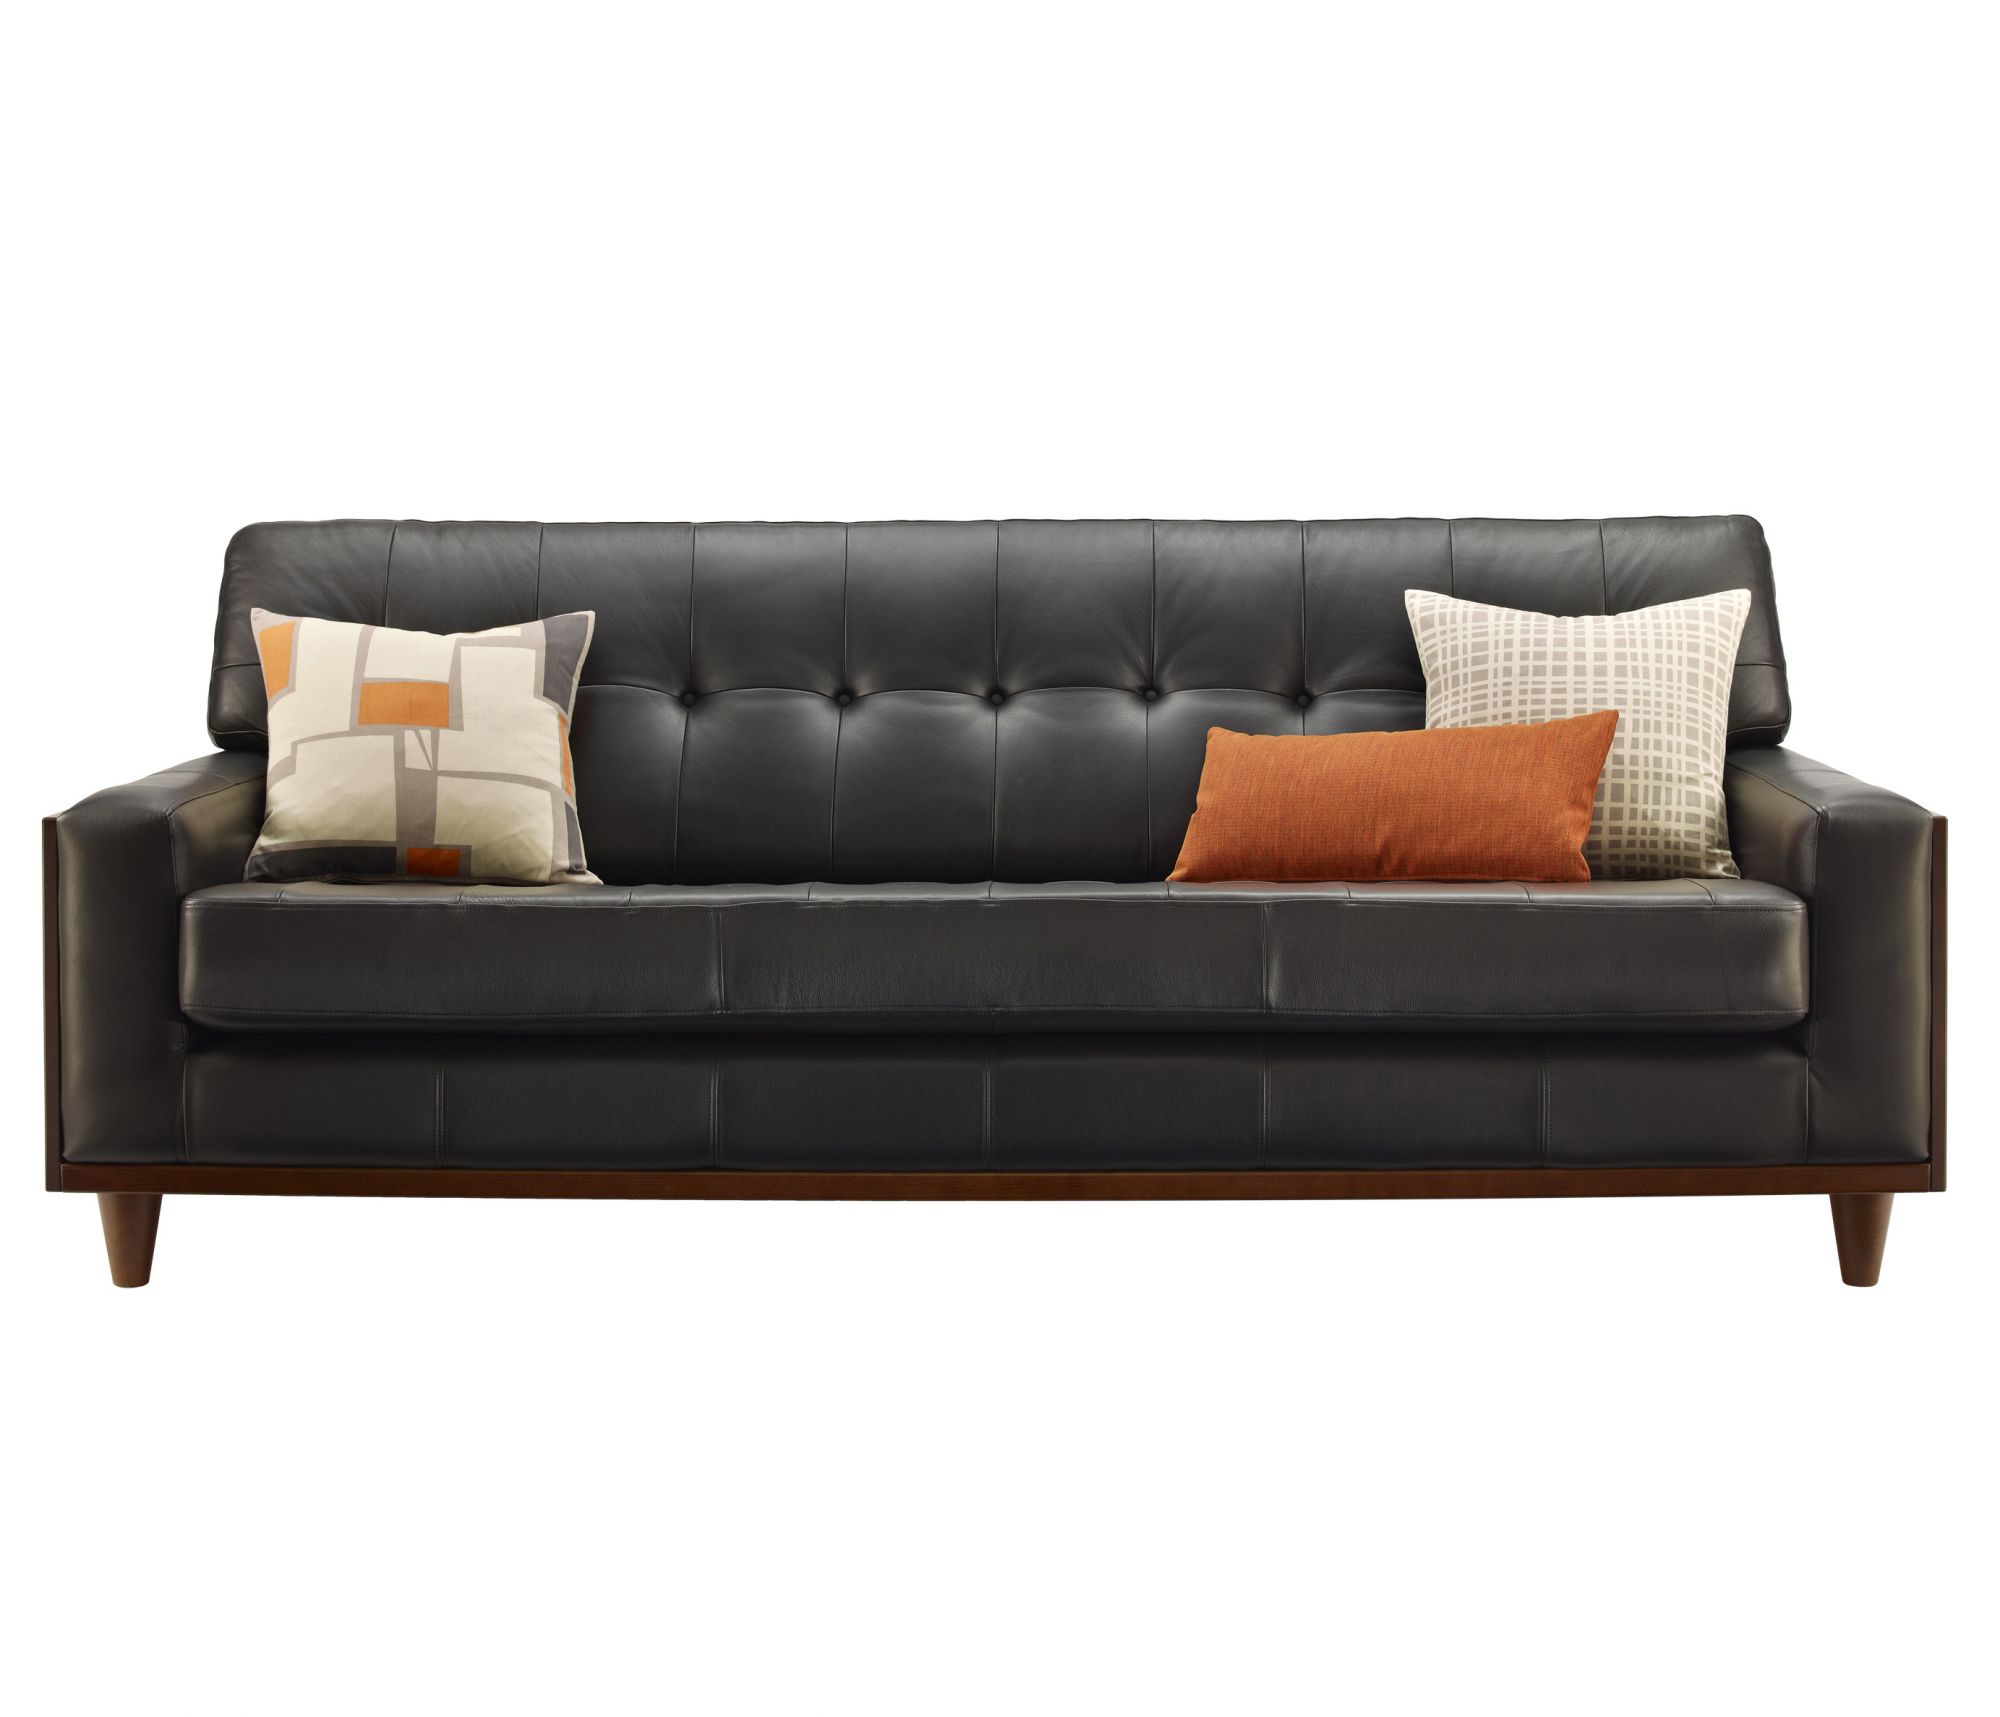 G Plan Vintage The Fifty Nine Leather Sofa in Capri Black with scatter